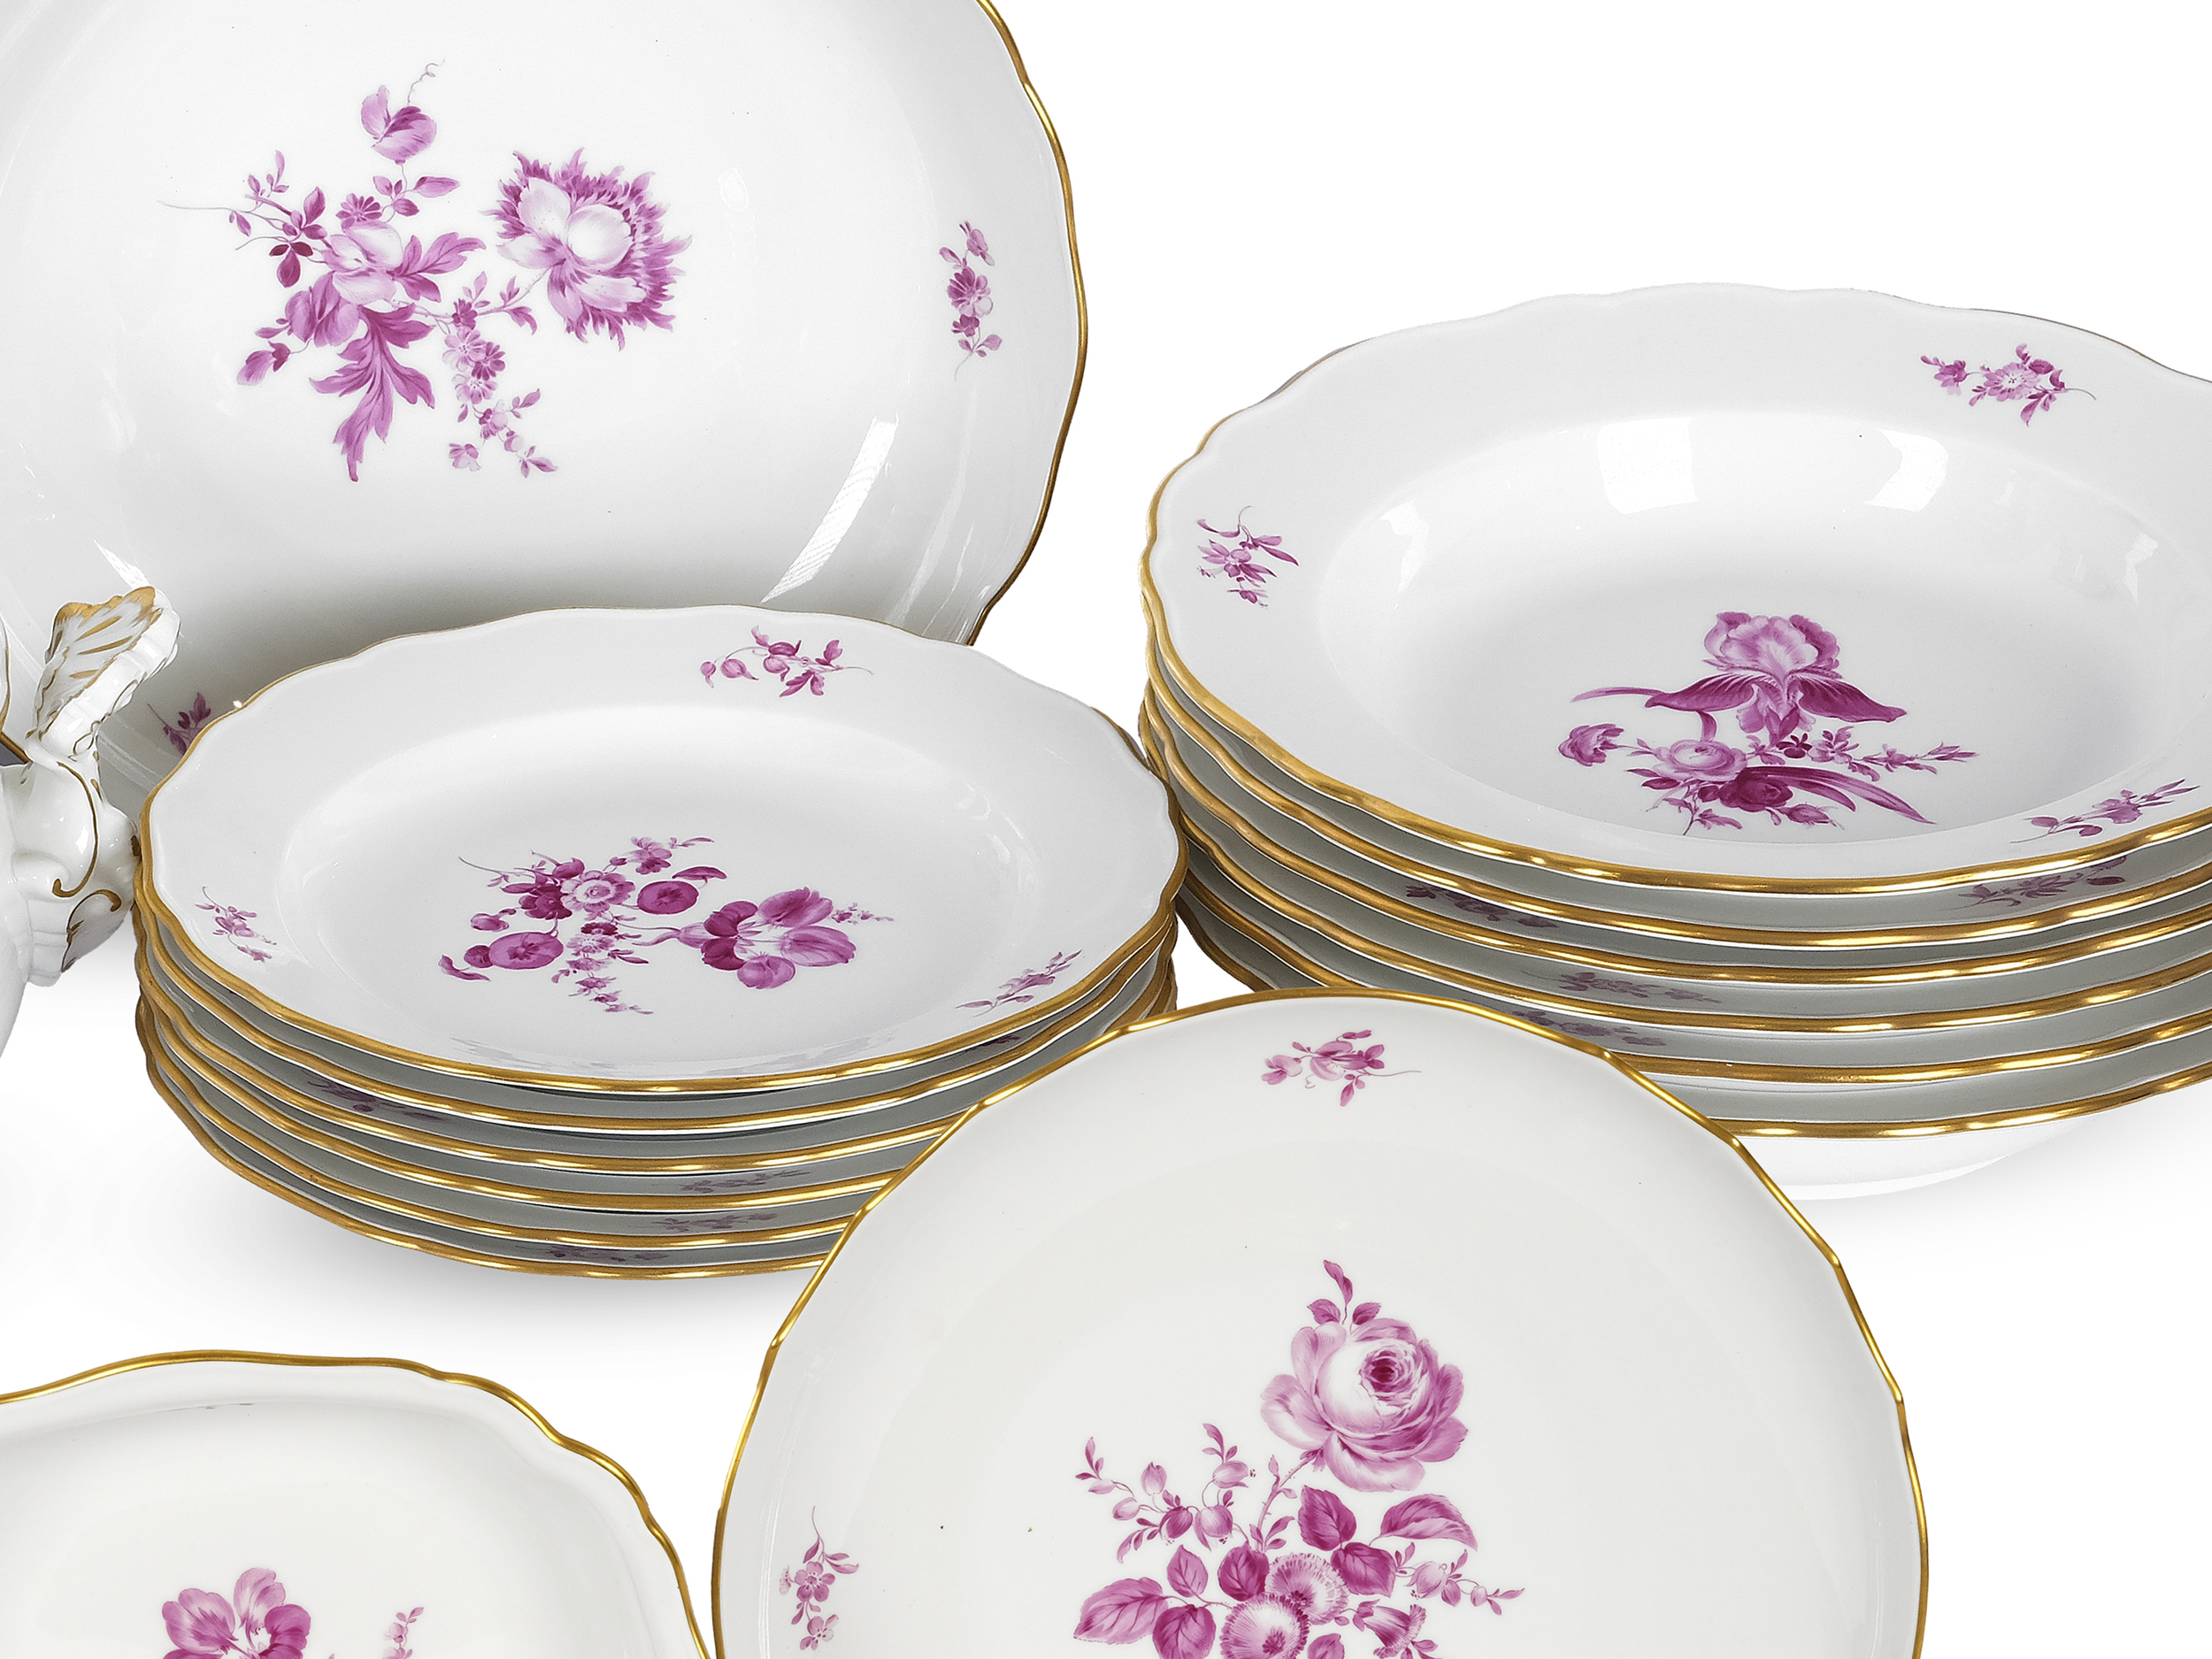 Dinner service for 6 persons, 24-piece, Violet foral decor, Meissen - Image 4 of 7